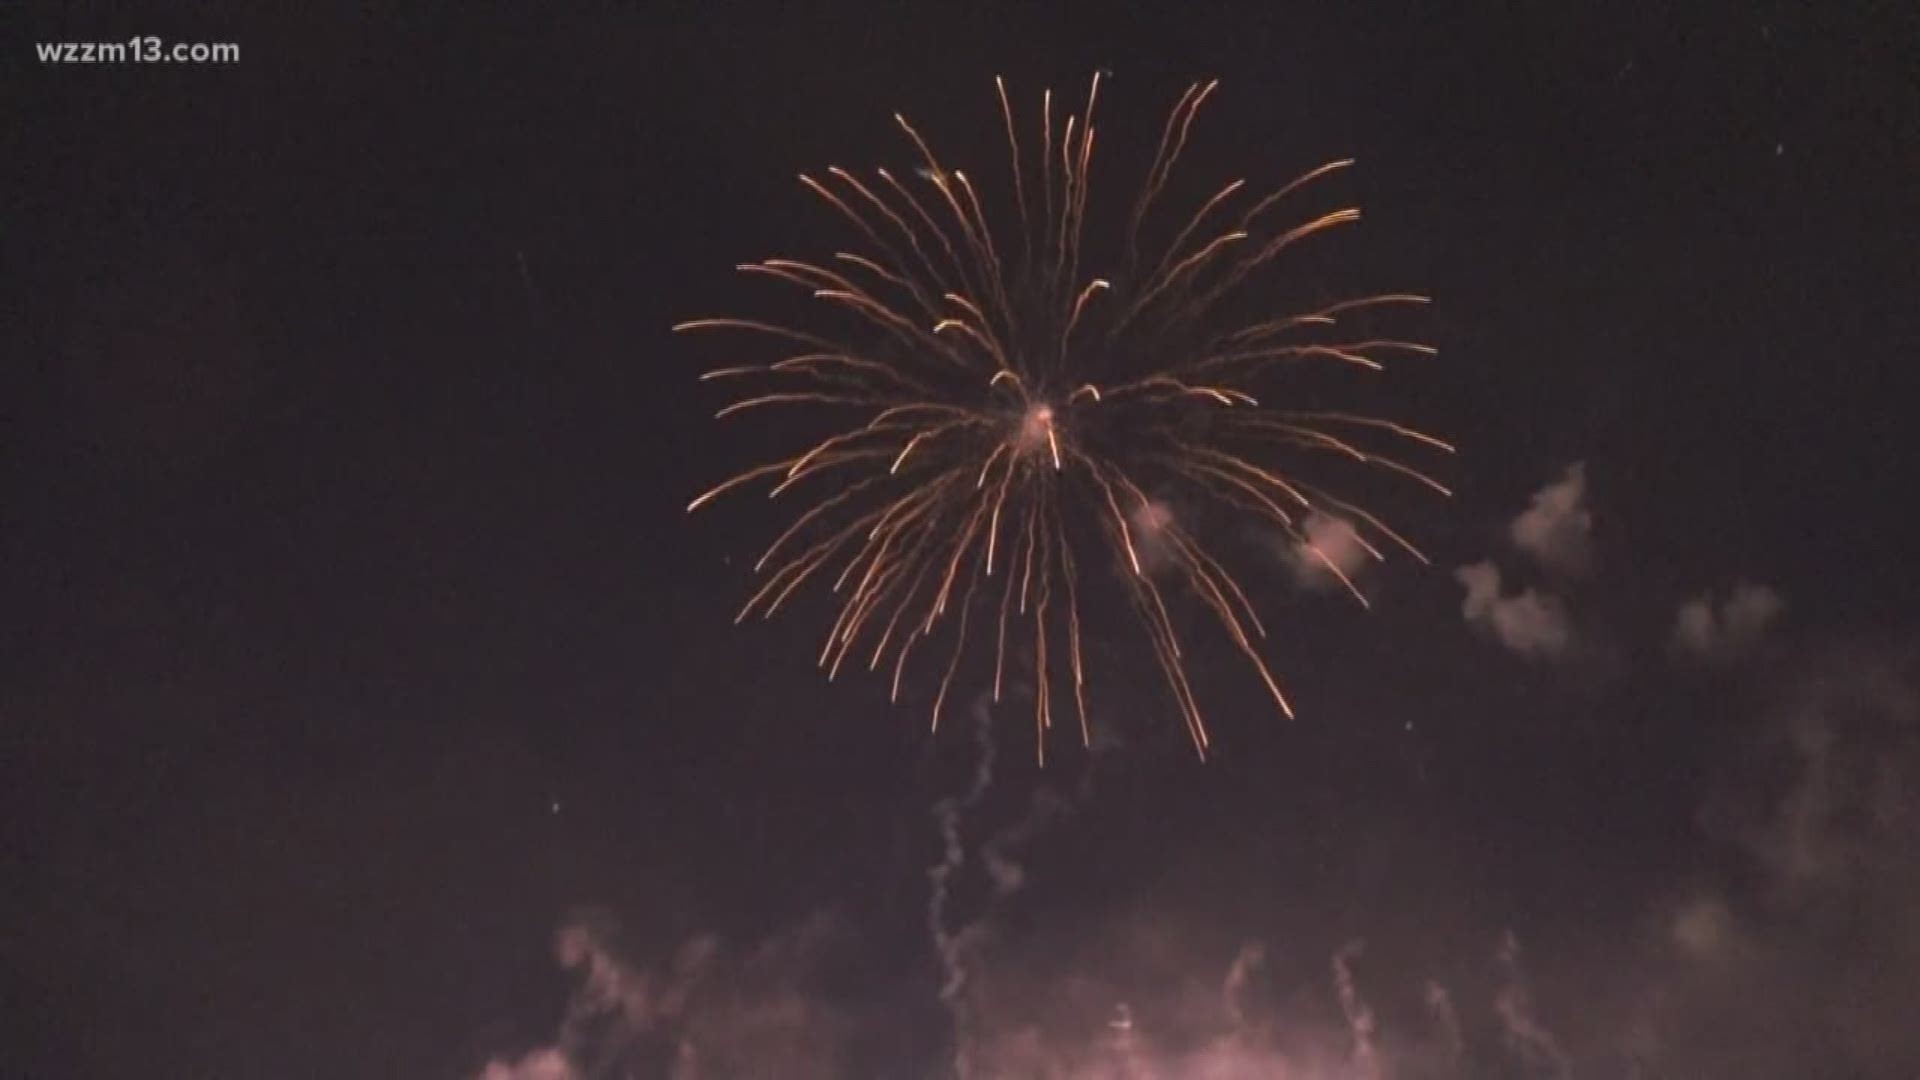 The law about setting off fireworks in the state of Michigan changed at the end of 2018. The new law, which went into effect on Dec. 28 of last year, gives local communities the option to lower the number of days when fireworks can be set off.